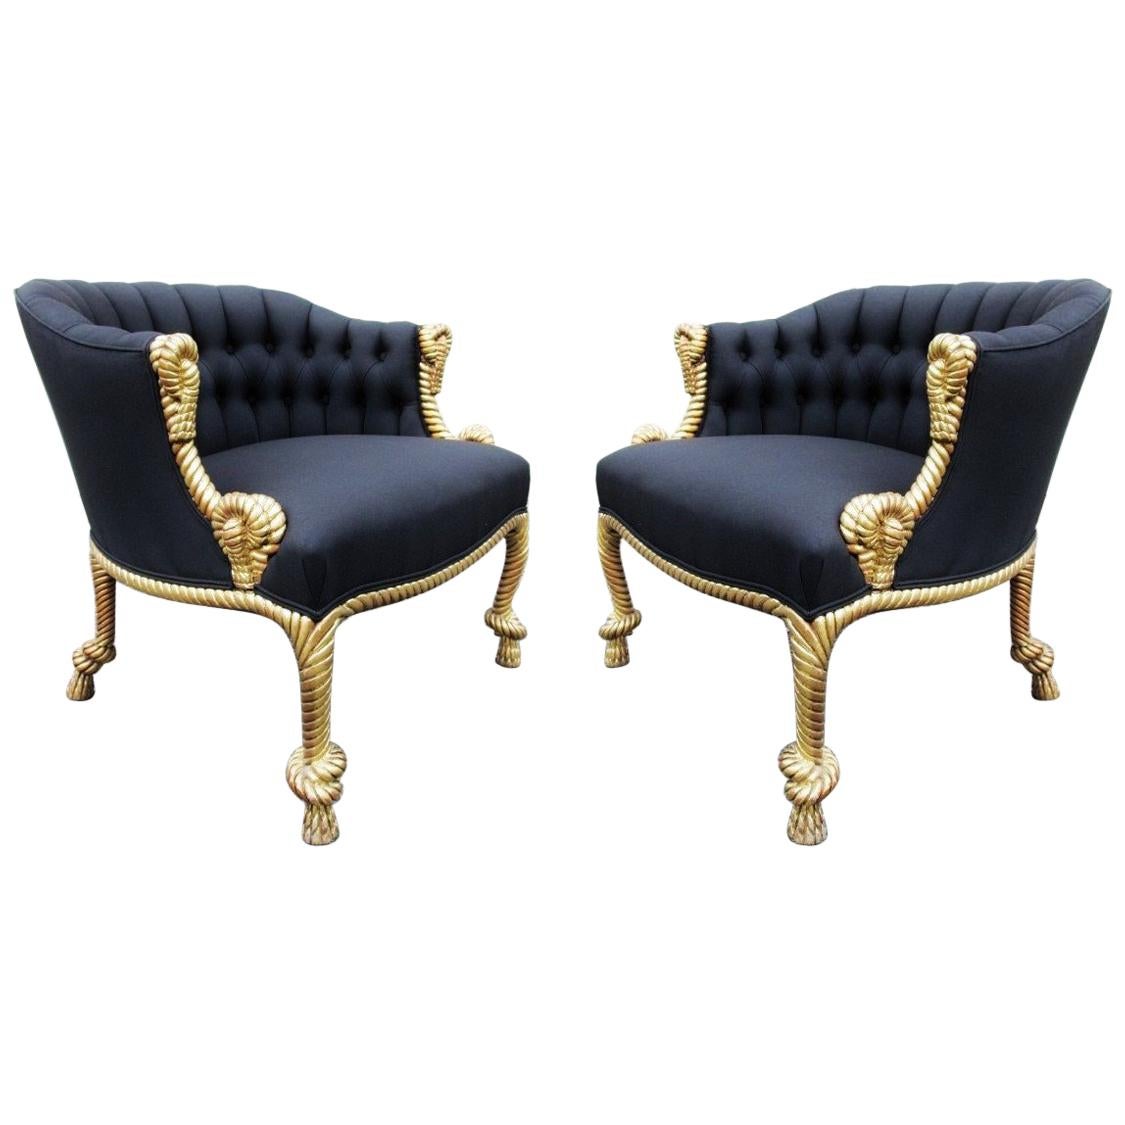 Stunning Pair of Napoleon III Style Twisted Rope and Tassel Carved Armchairs For Sale